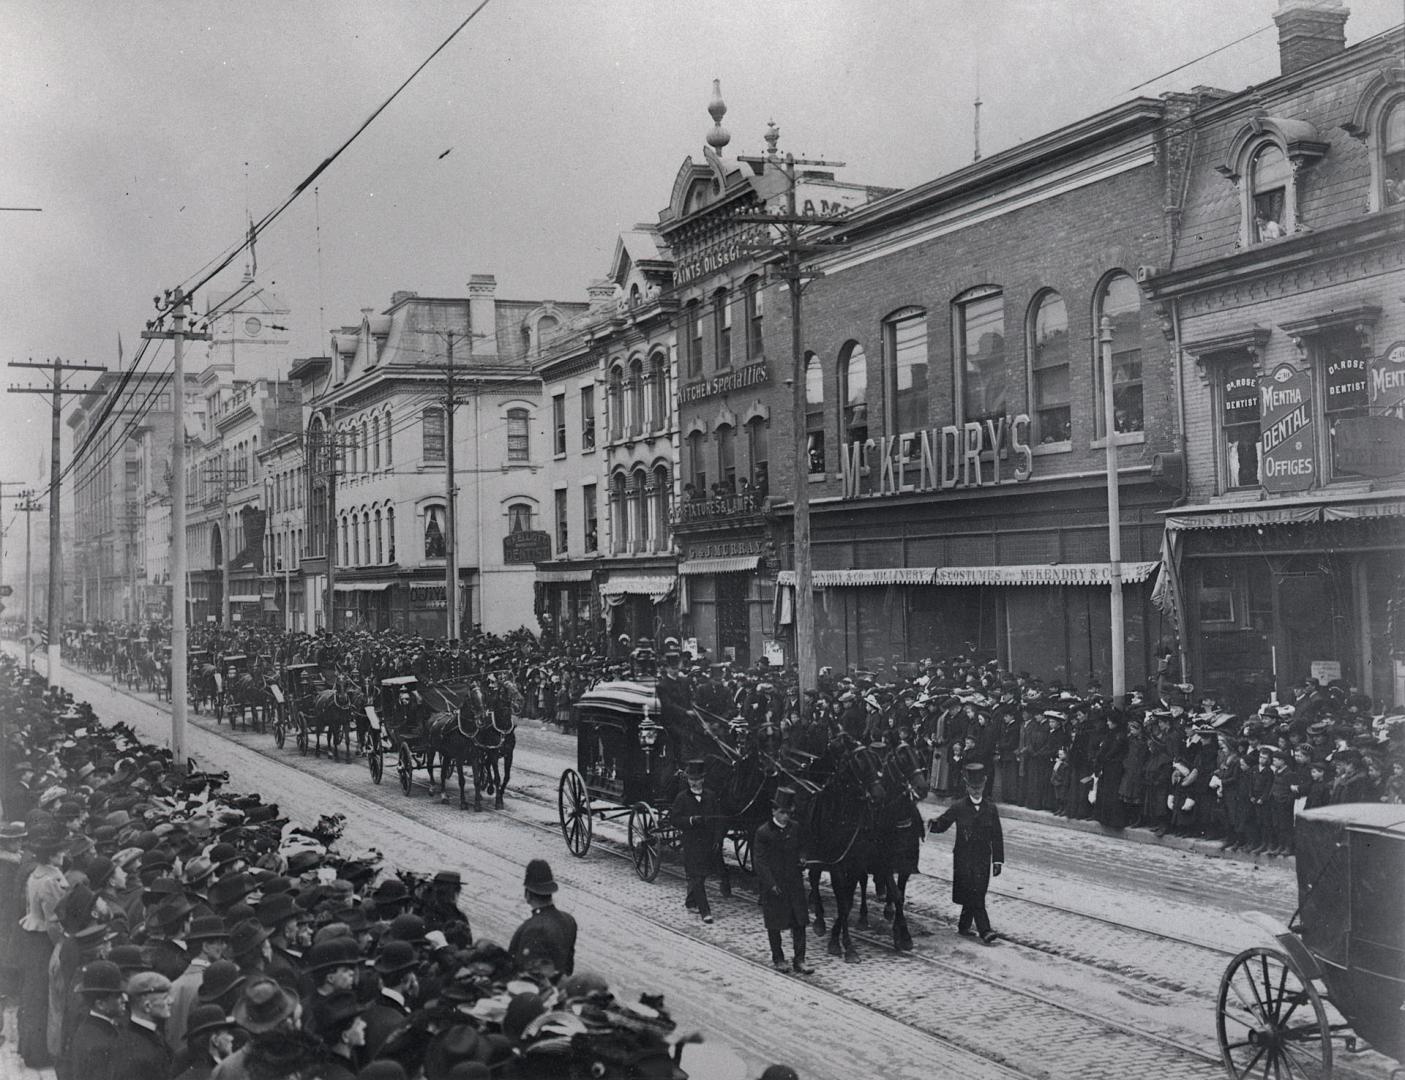 Mowat, Sir Oliver, Funeral Procession, on Yonge Street, looking south from Shuter St